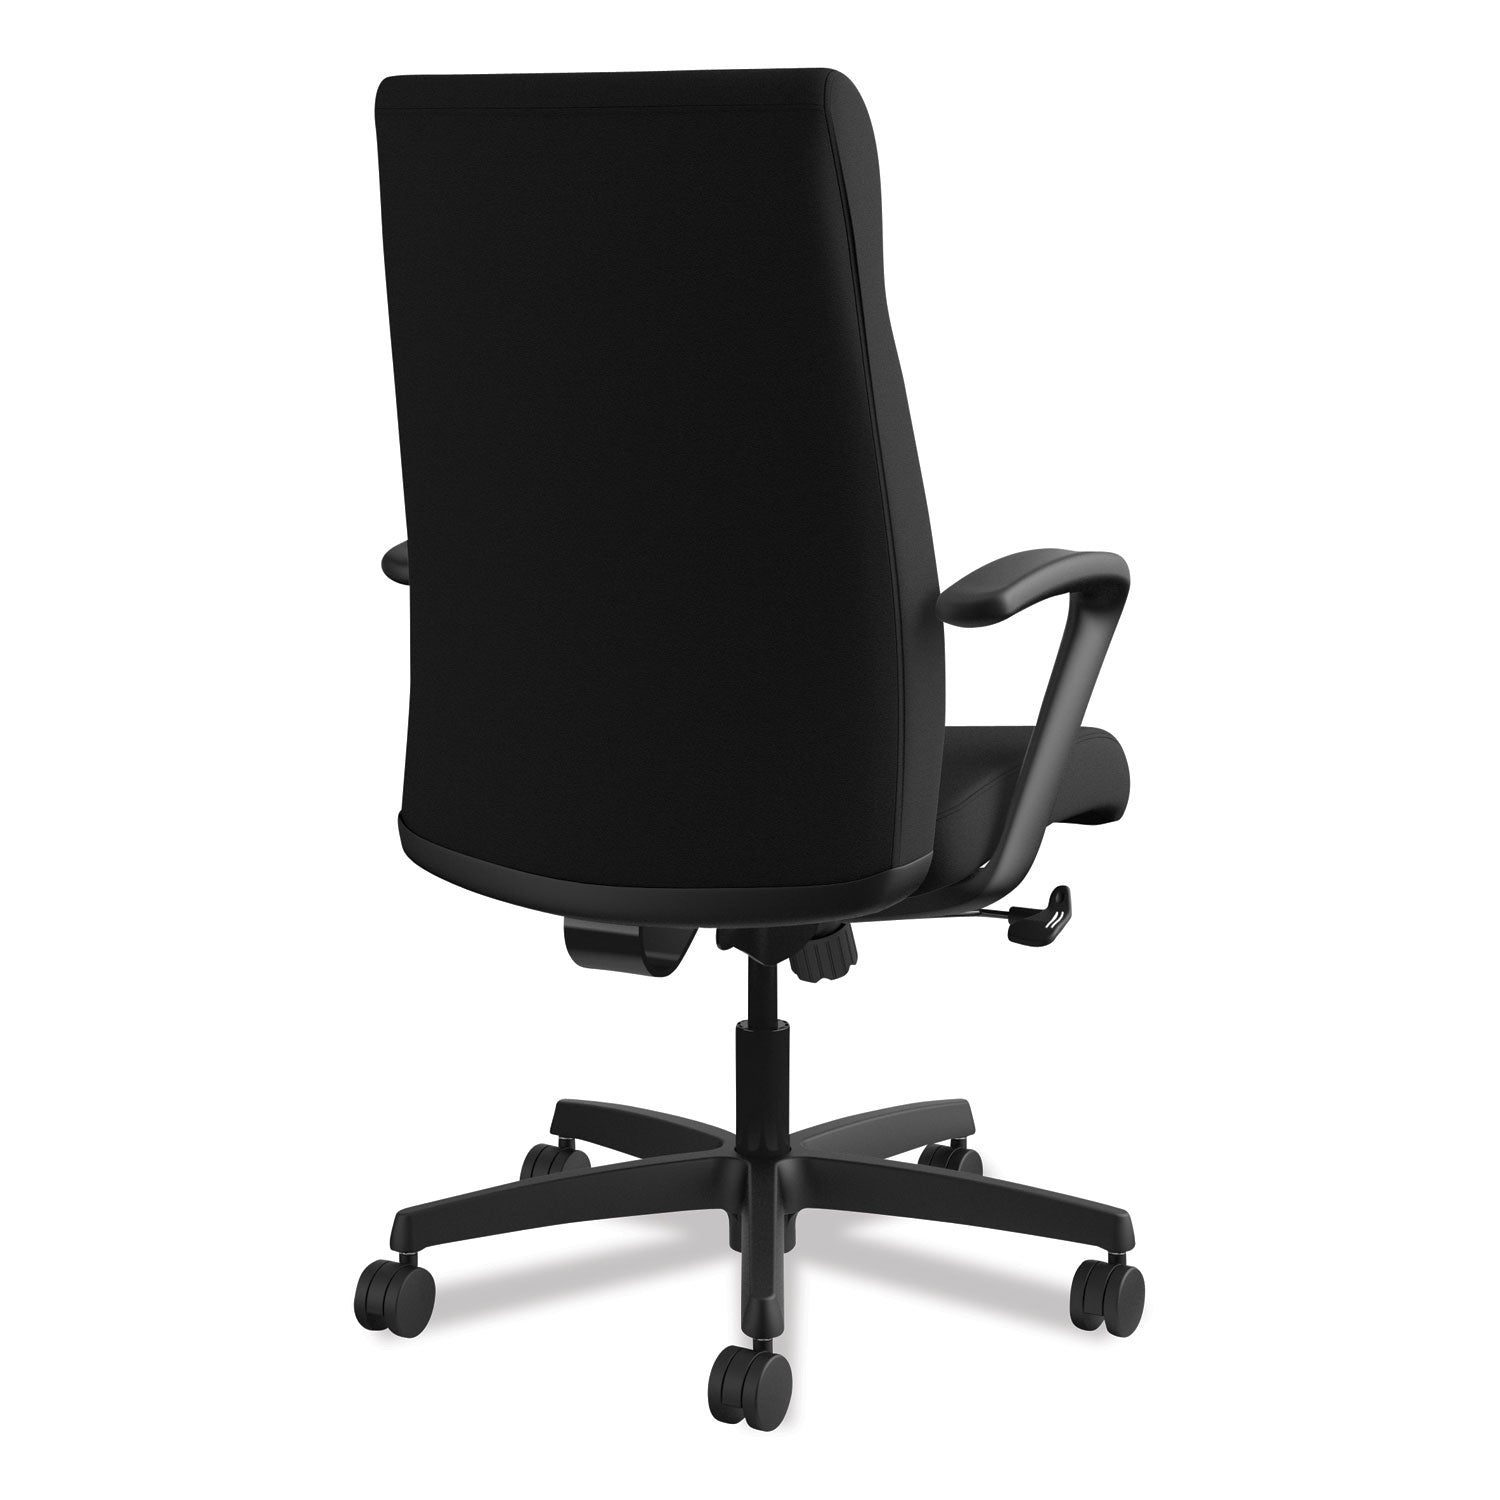 ignition-series-executive-high-back-chair-supports-up-to-300-lb-17-to-21-seat-height-black_honie102cu10 - 6